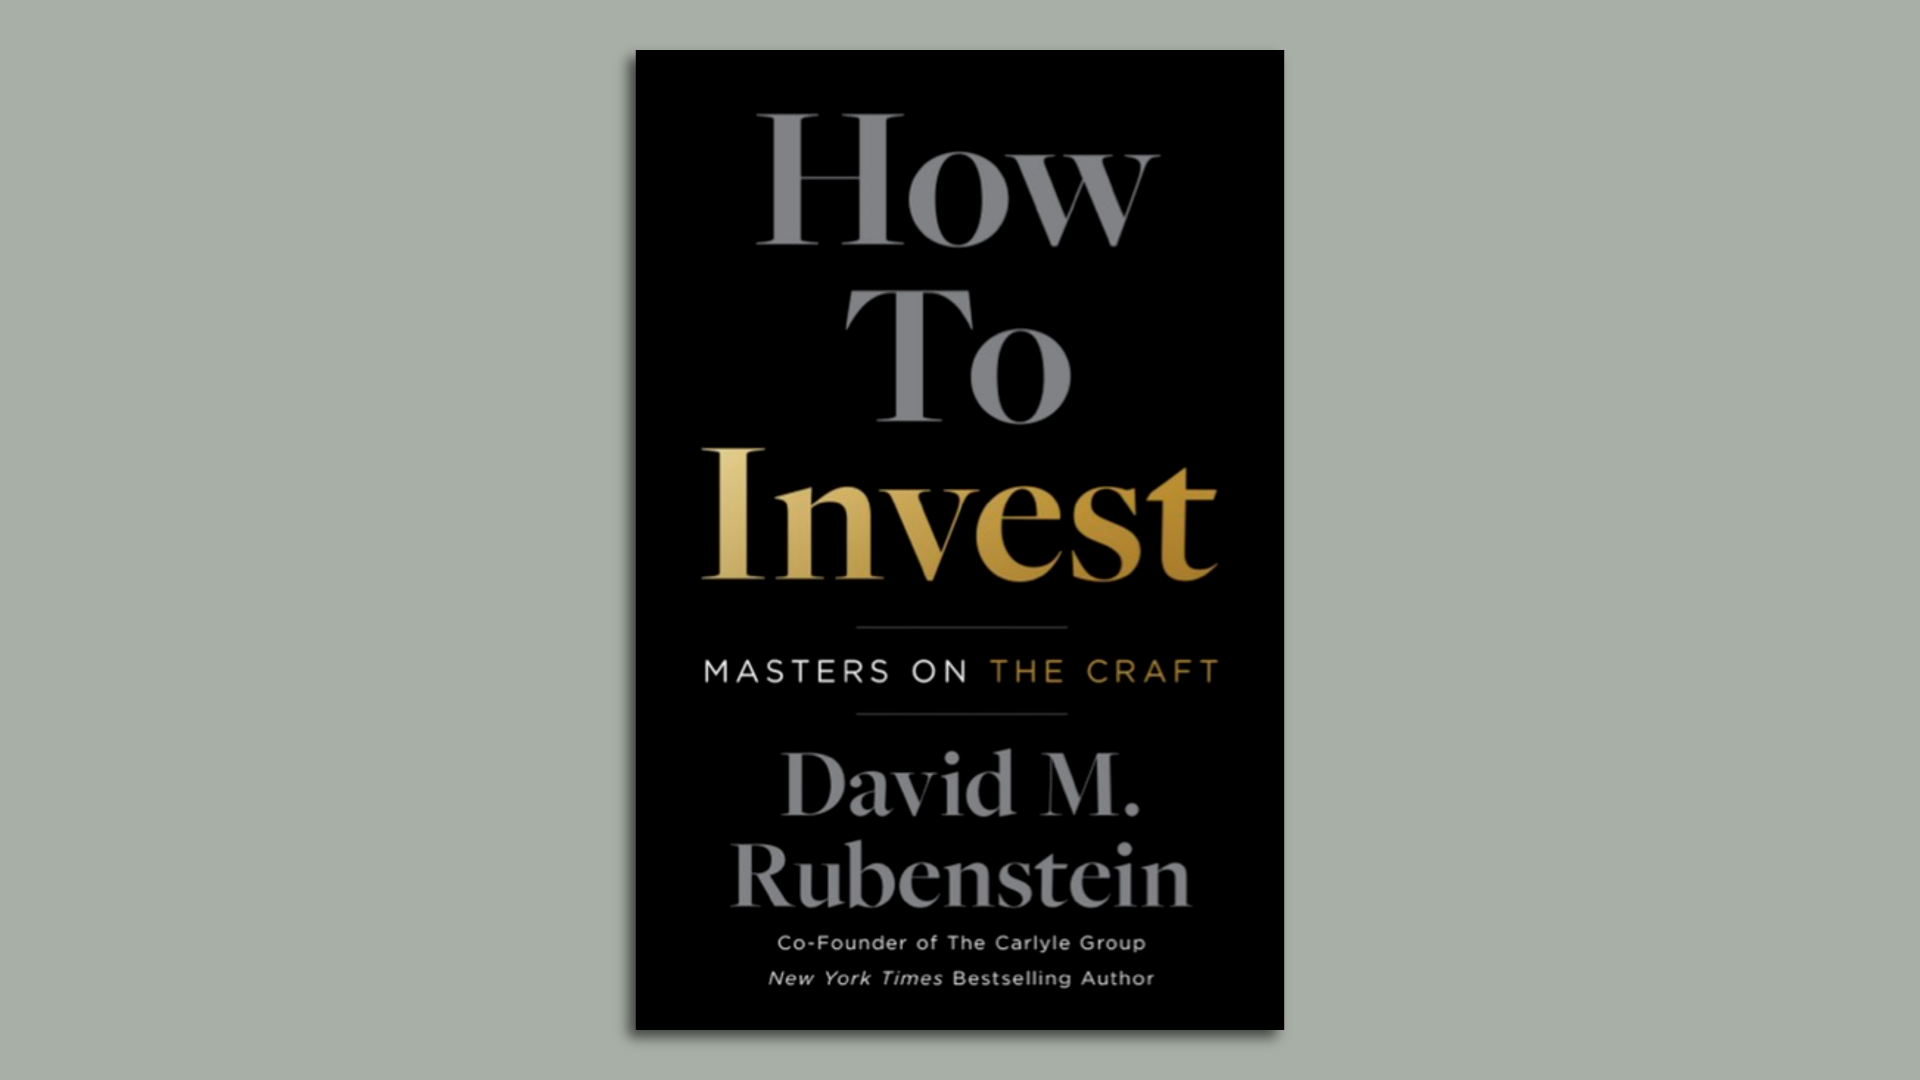 The cover of "How to Invest" by David Rubenstein